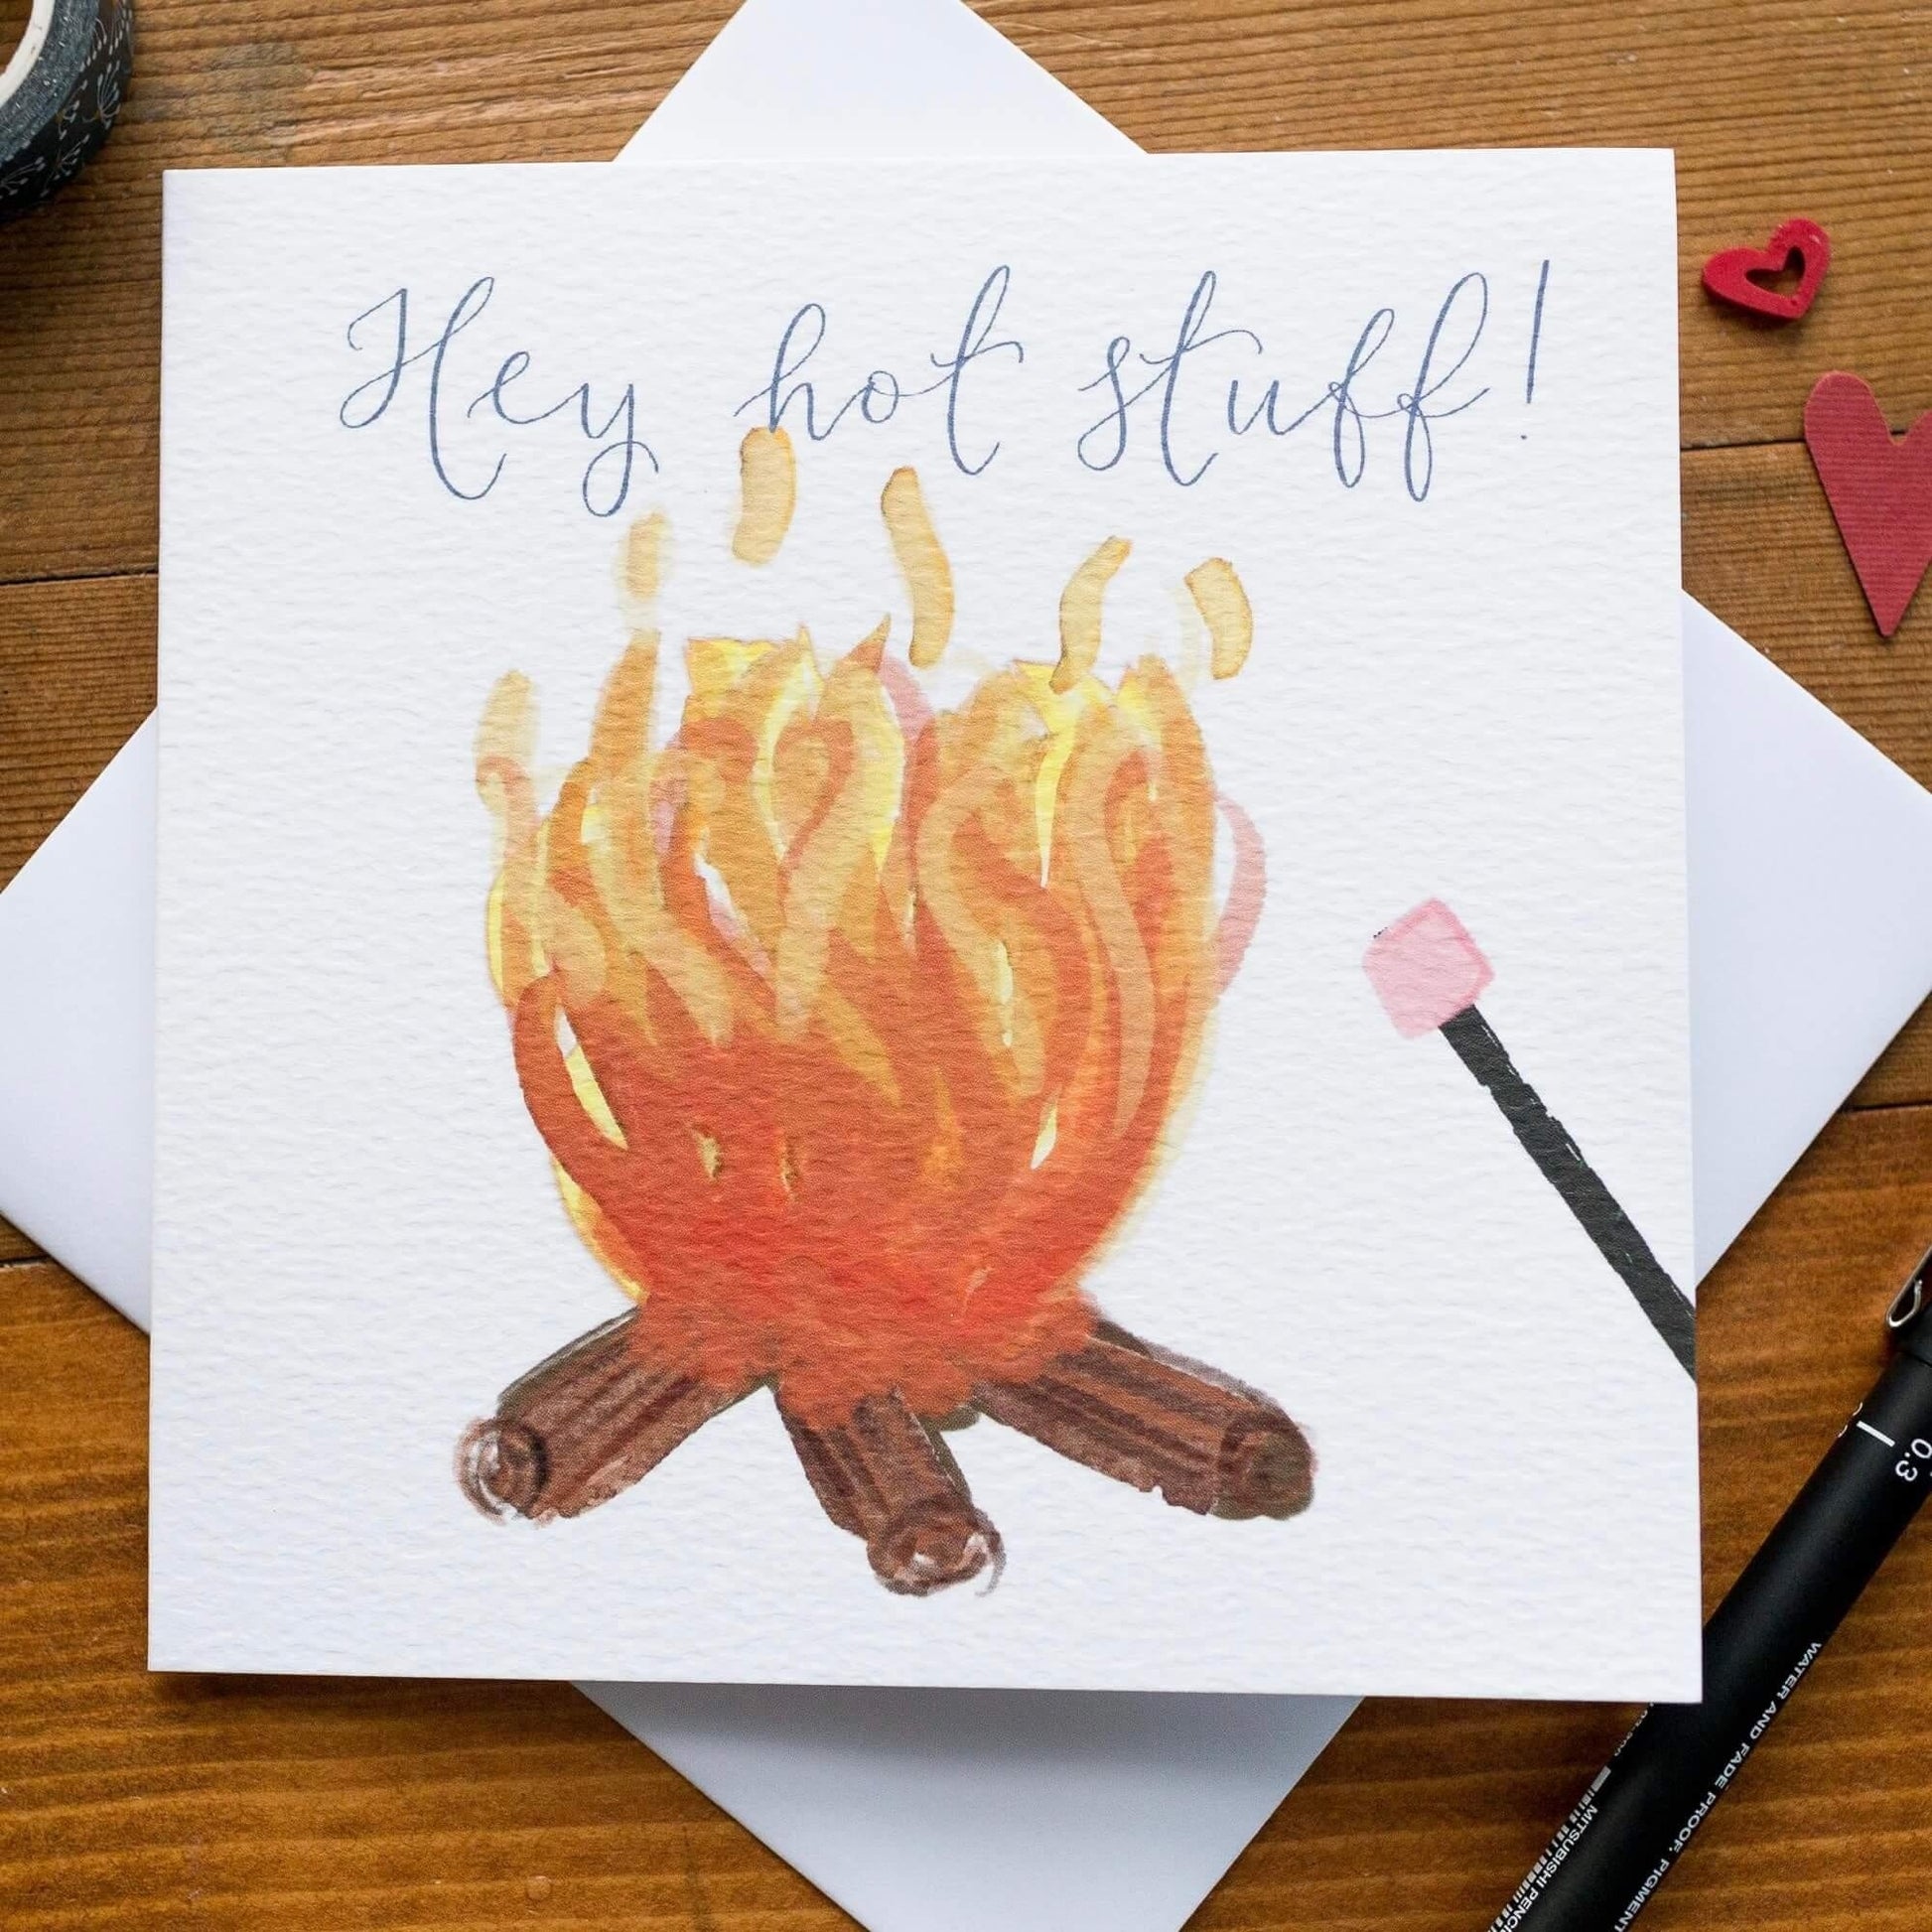 Hey Hot Stuff card Greeting & Note Cards And Hope Designs   